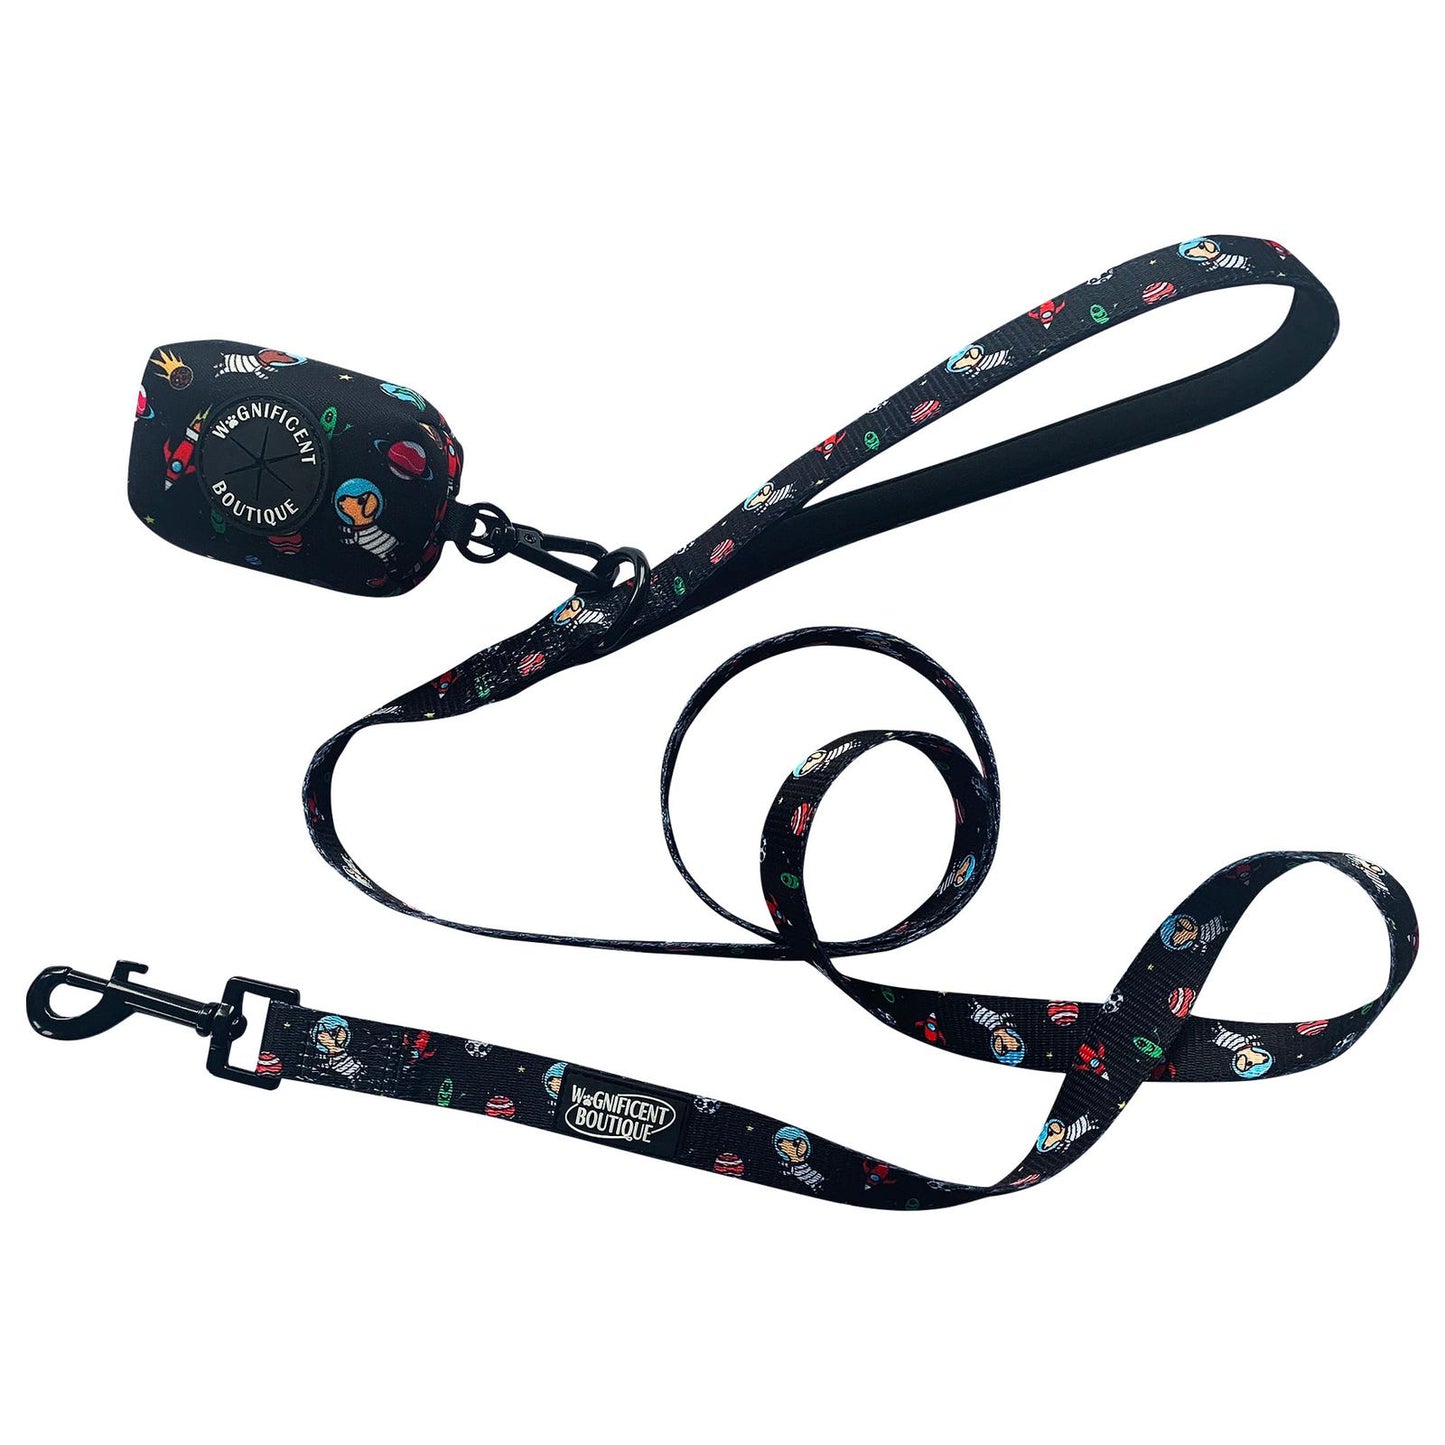 Space Pups Poo Bag Holder - Unique Poo Bag Holder | Wagnificent Boutique: Stylish Harnesses, Collars, Leads, and Matching Poo Bag Holders